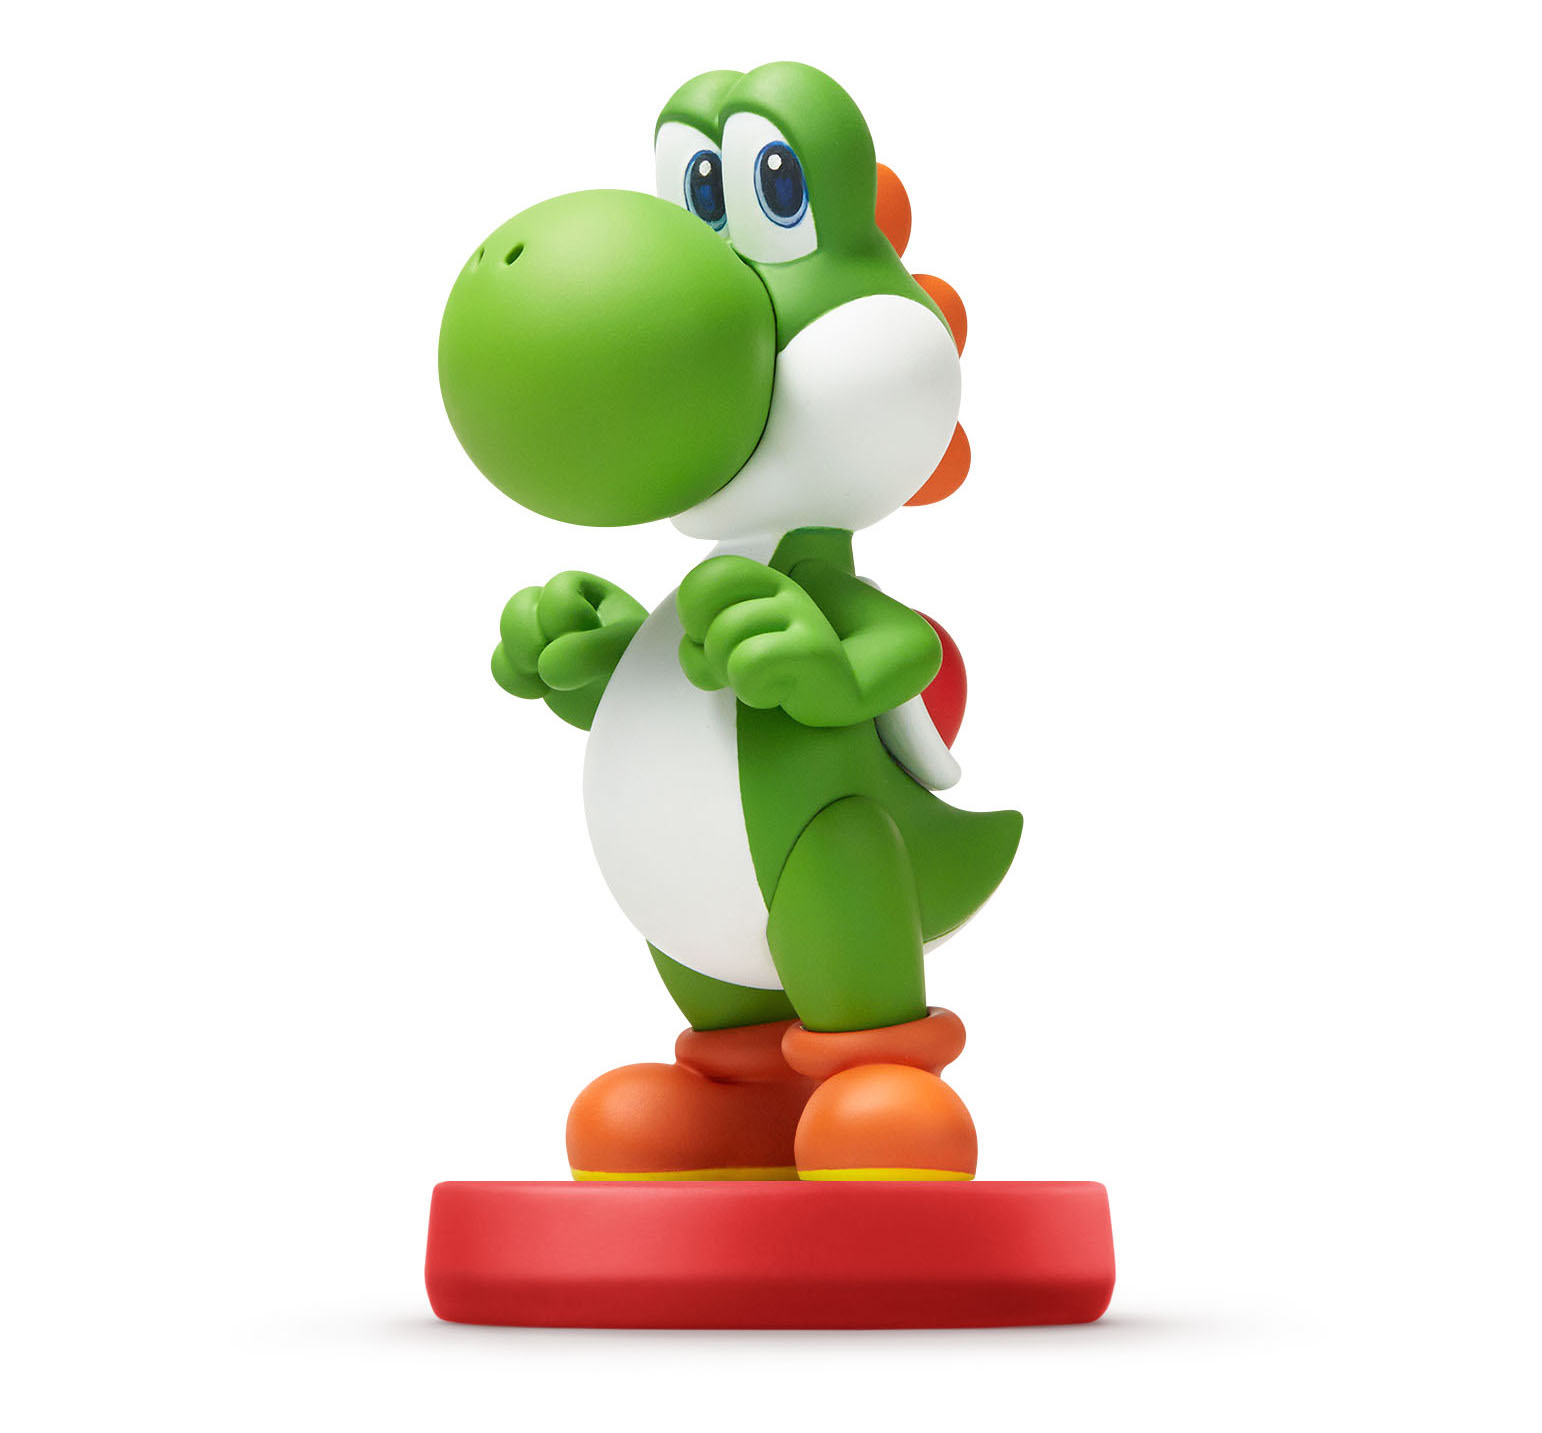 “Yoshi’s Wooly World” Supports Regular Amiibos - Play as a Mario-Skinned Yoshi and More